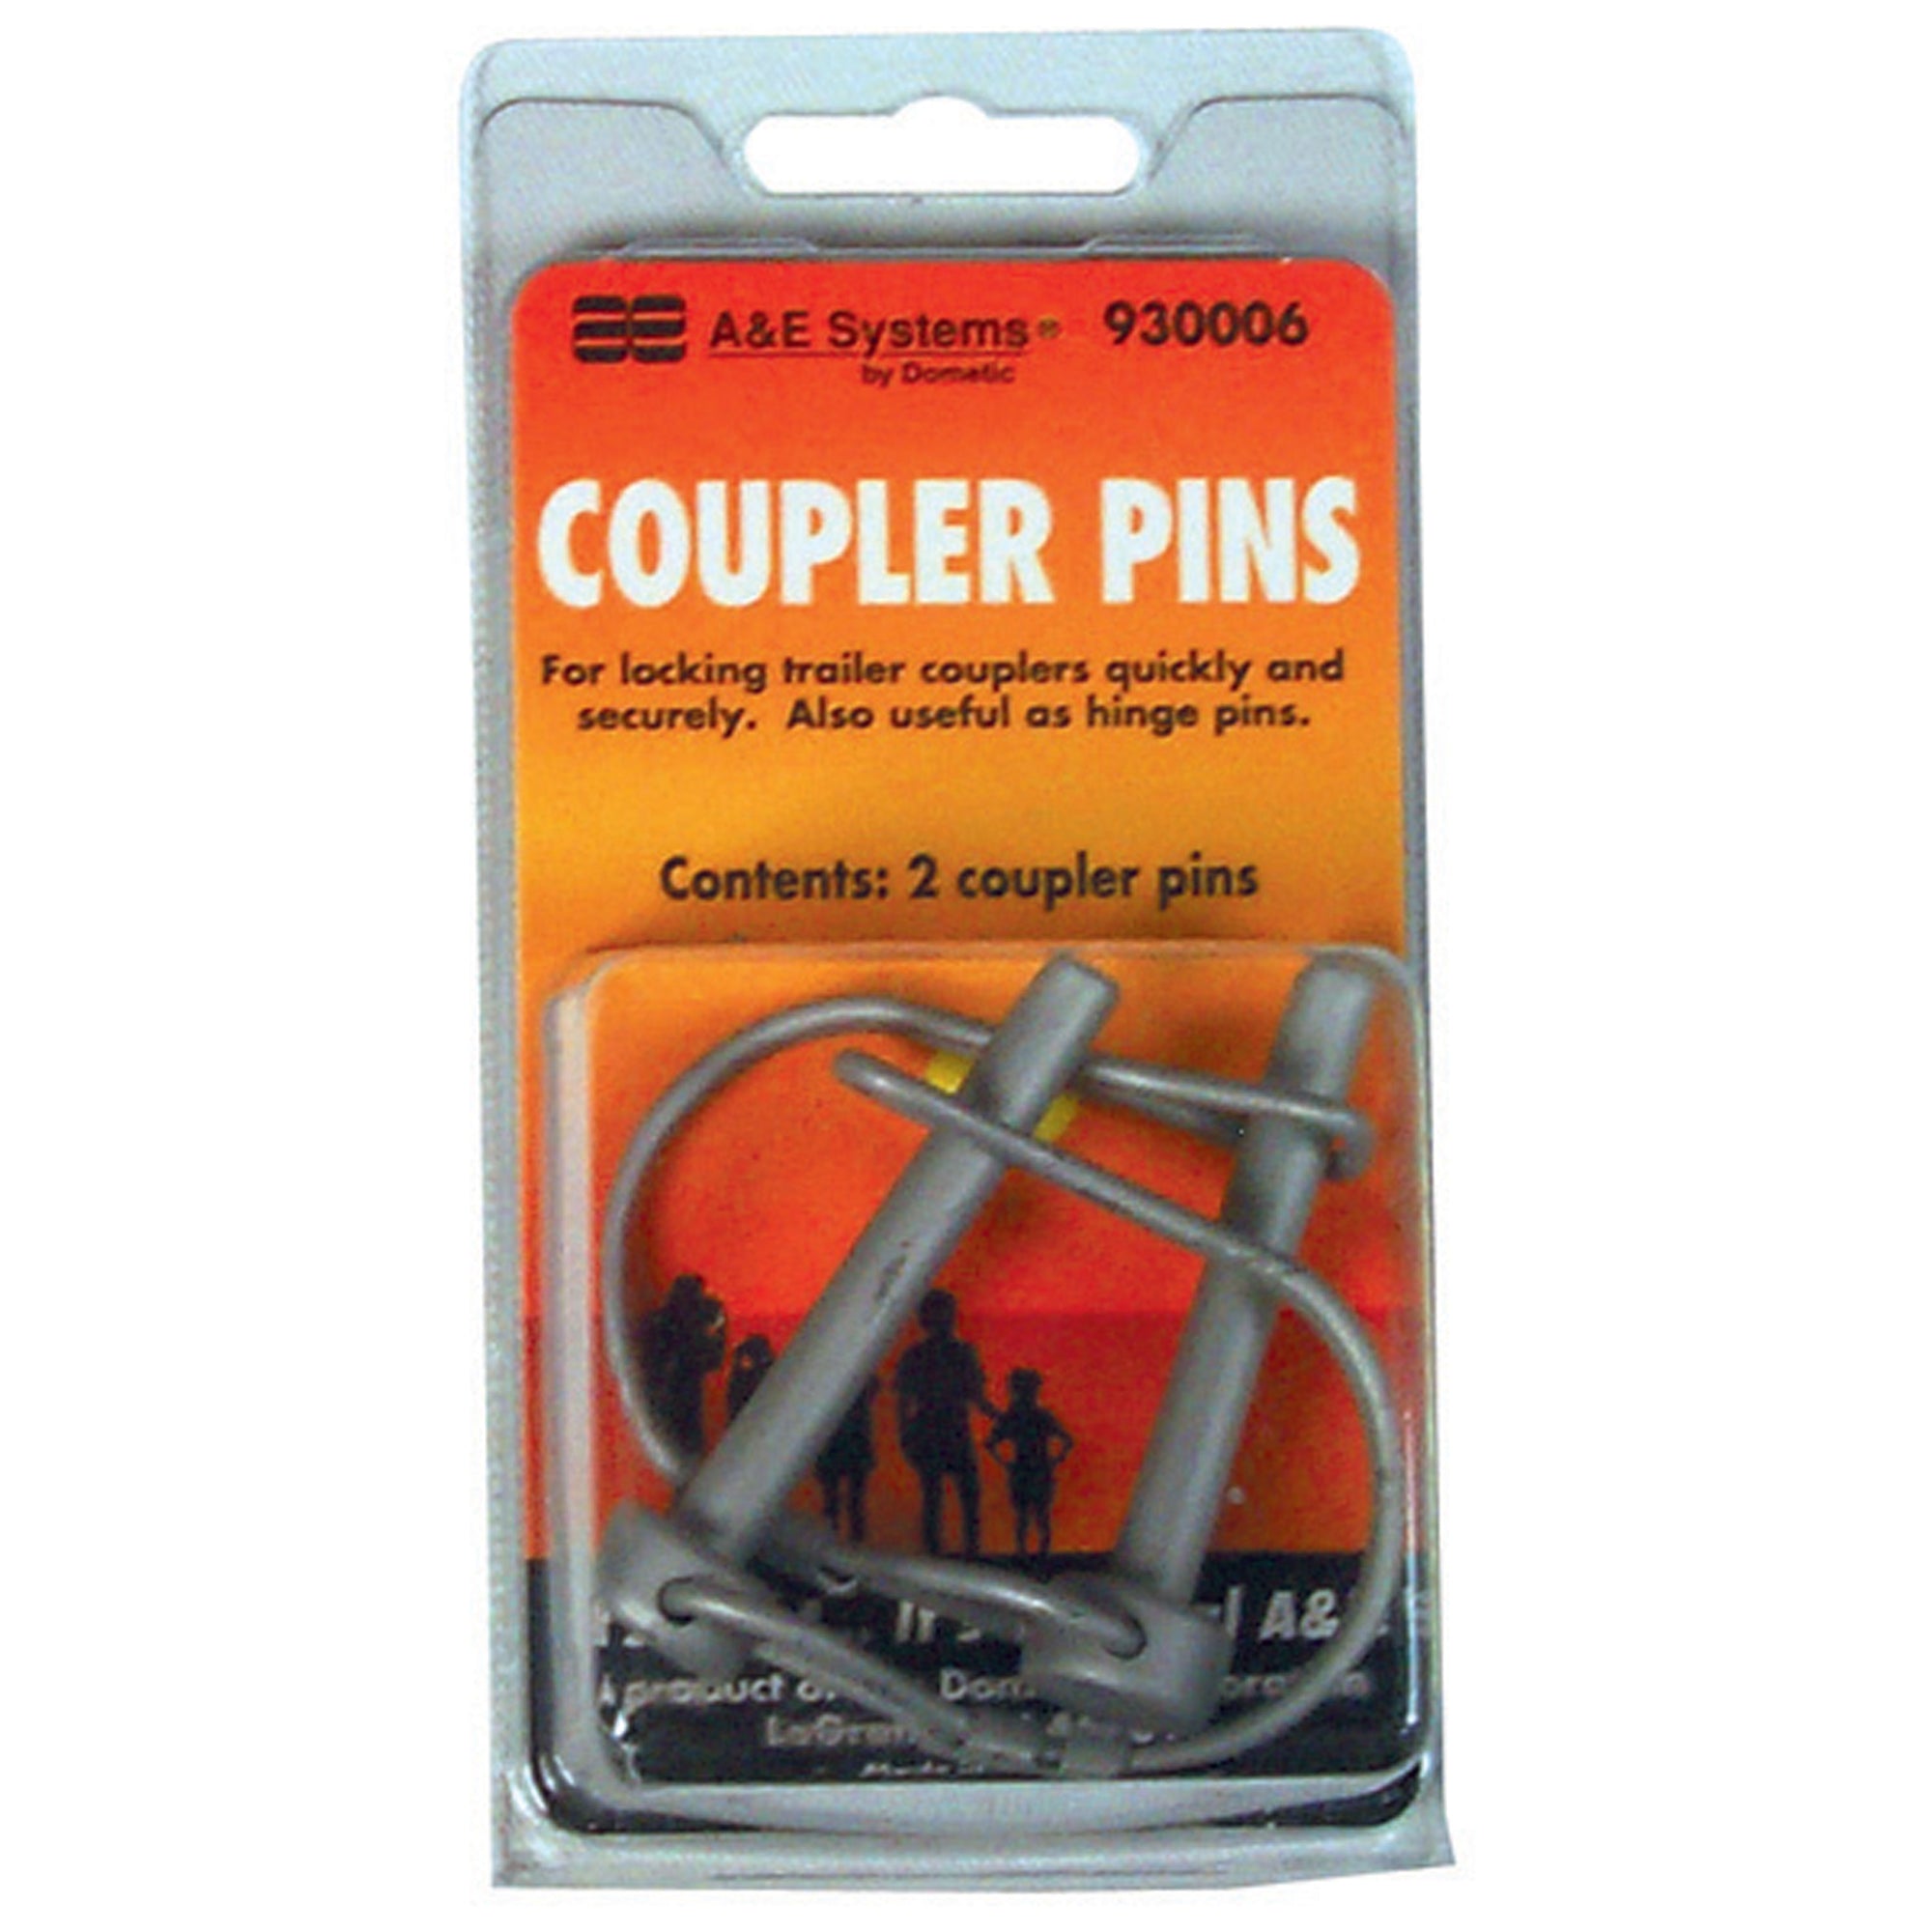 Dometic 930006 Coupler Pins - Pack of 2